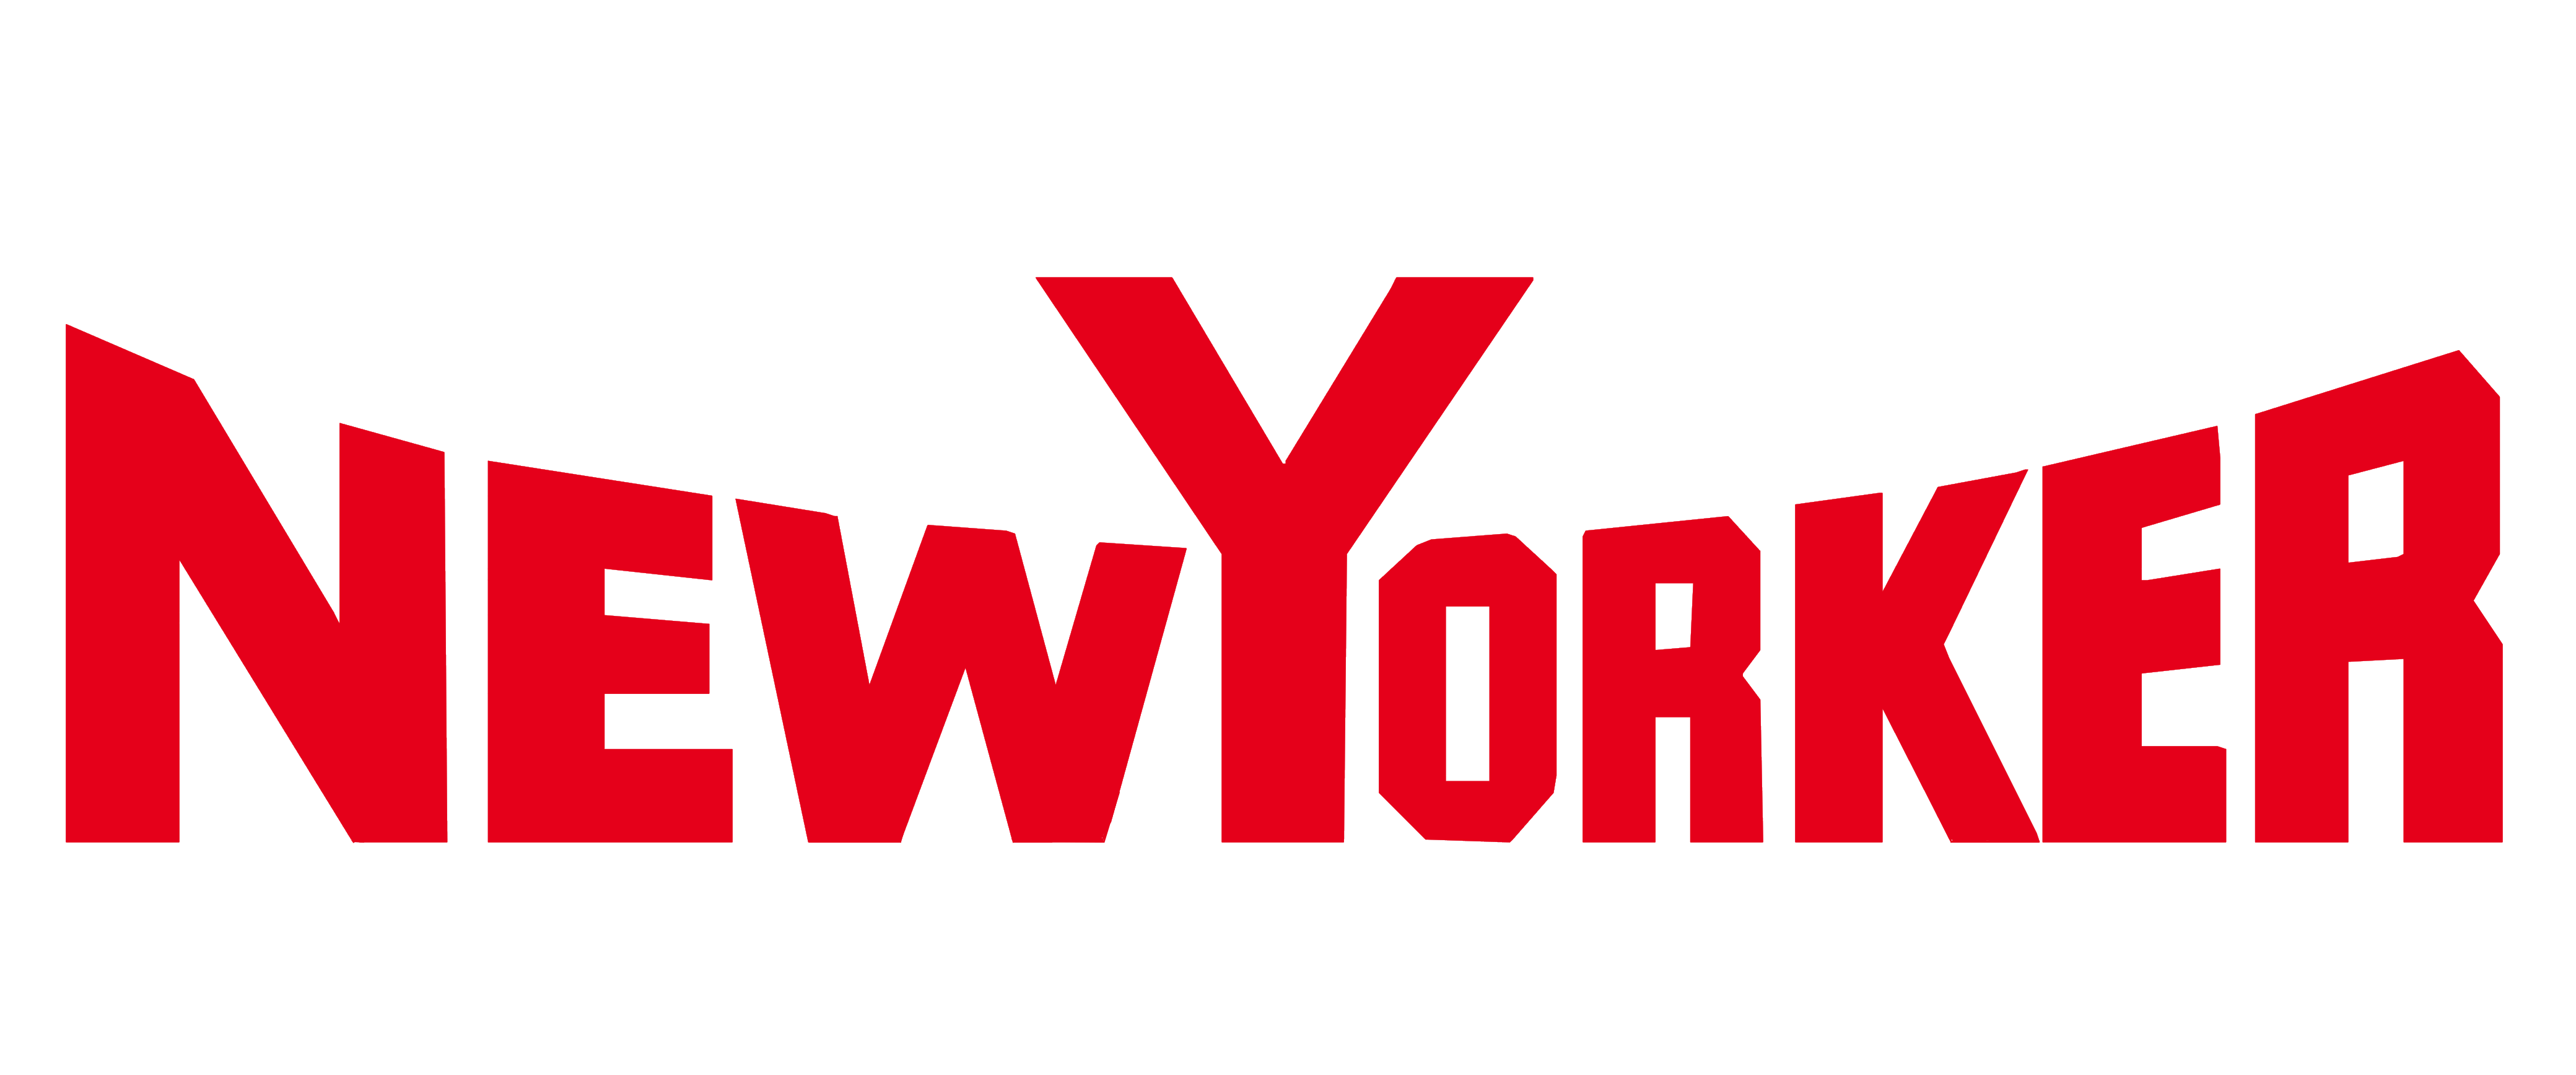 New Yorker Logo (Newyorker) - Newyorker, Transparent background PNG HD thumbnail